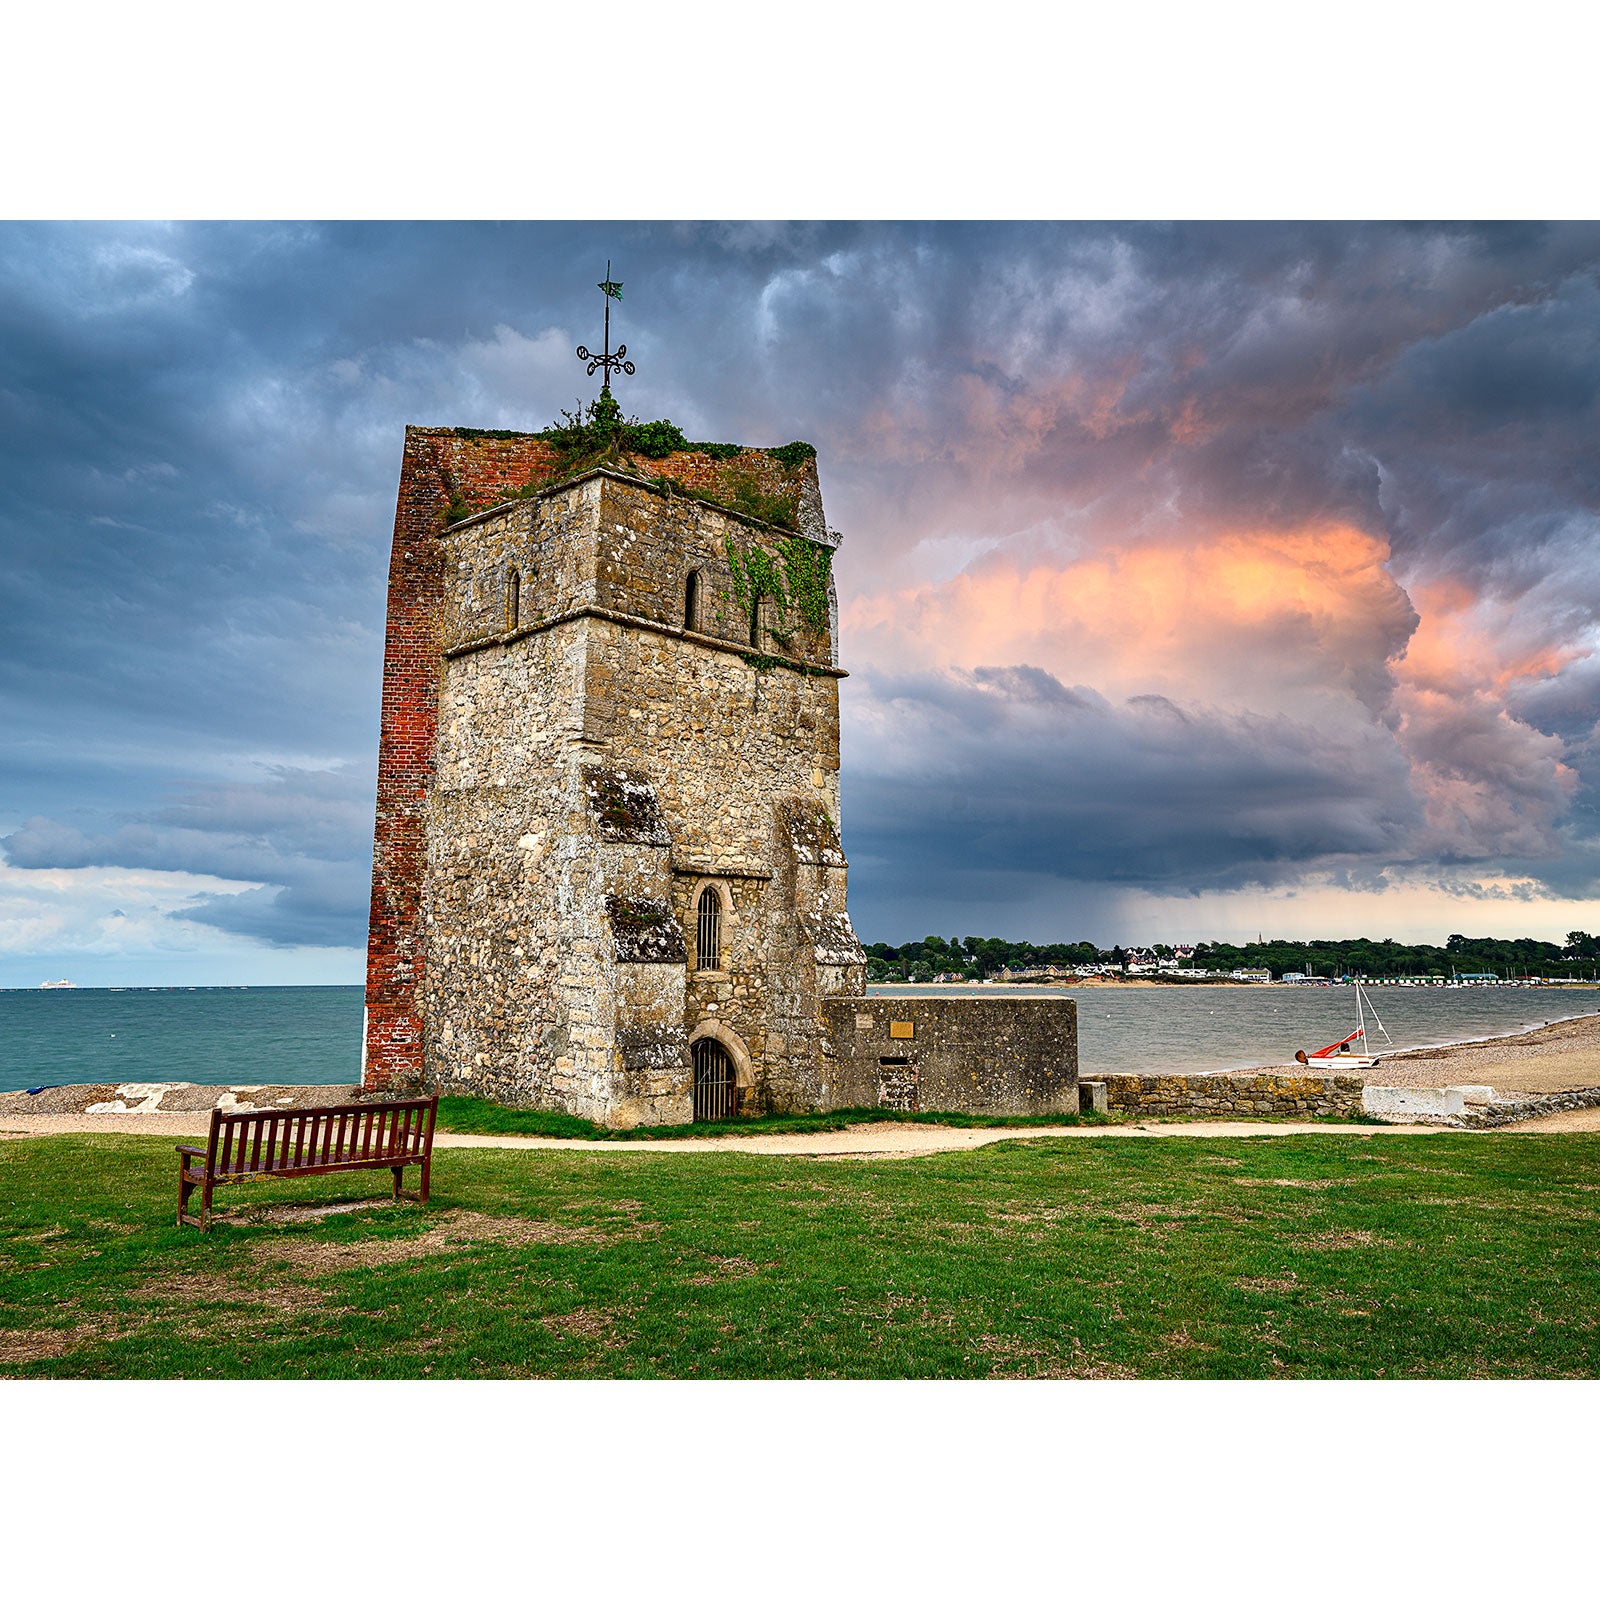 An ancient stone tower with vegetation growth under a dramatic sky at the edge of a coastline on the Isle of Wight captured by Available Light Photography's St. Helens Old Church.